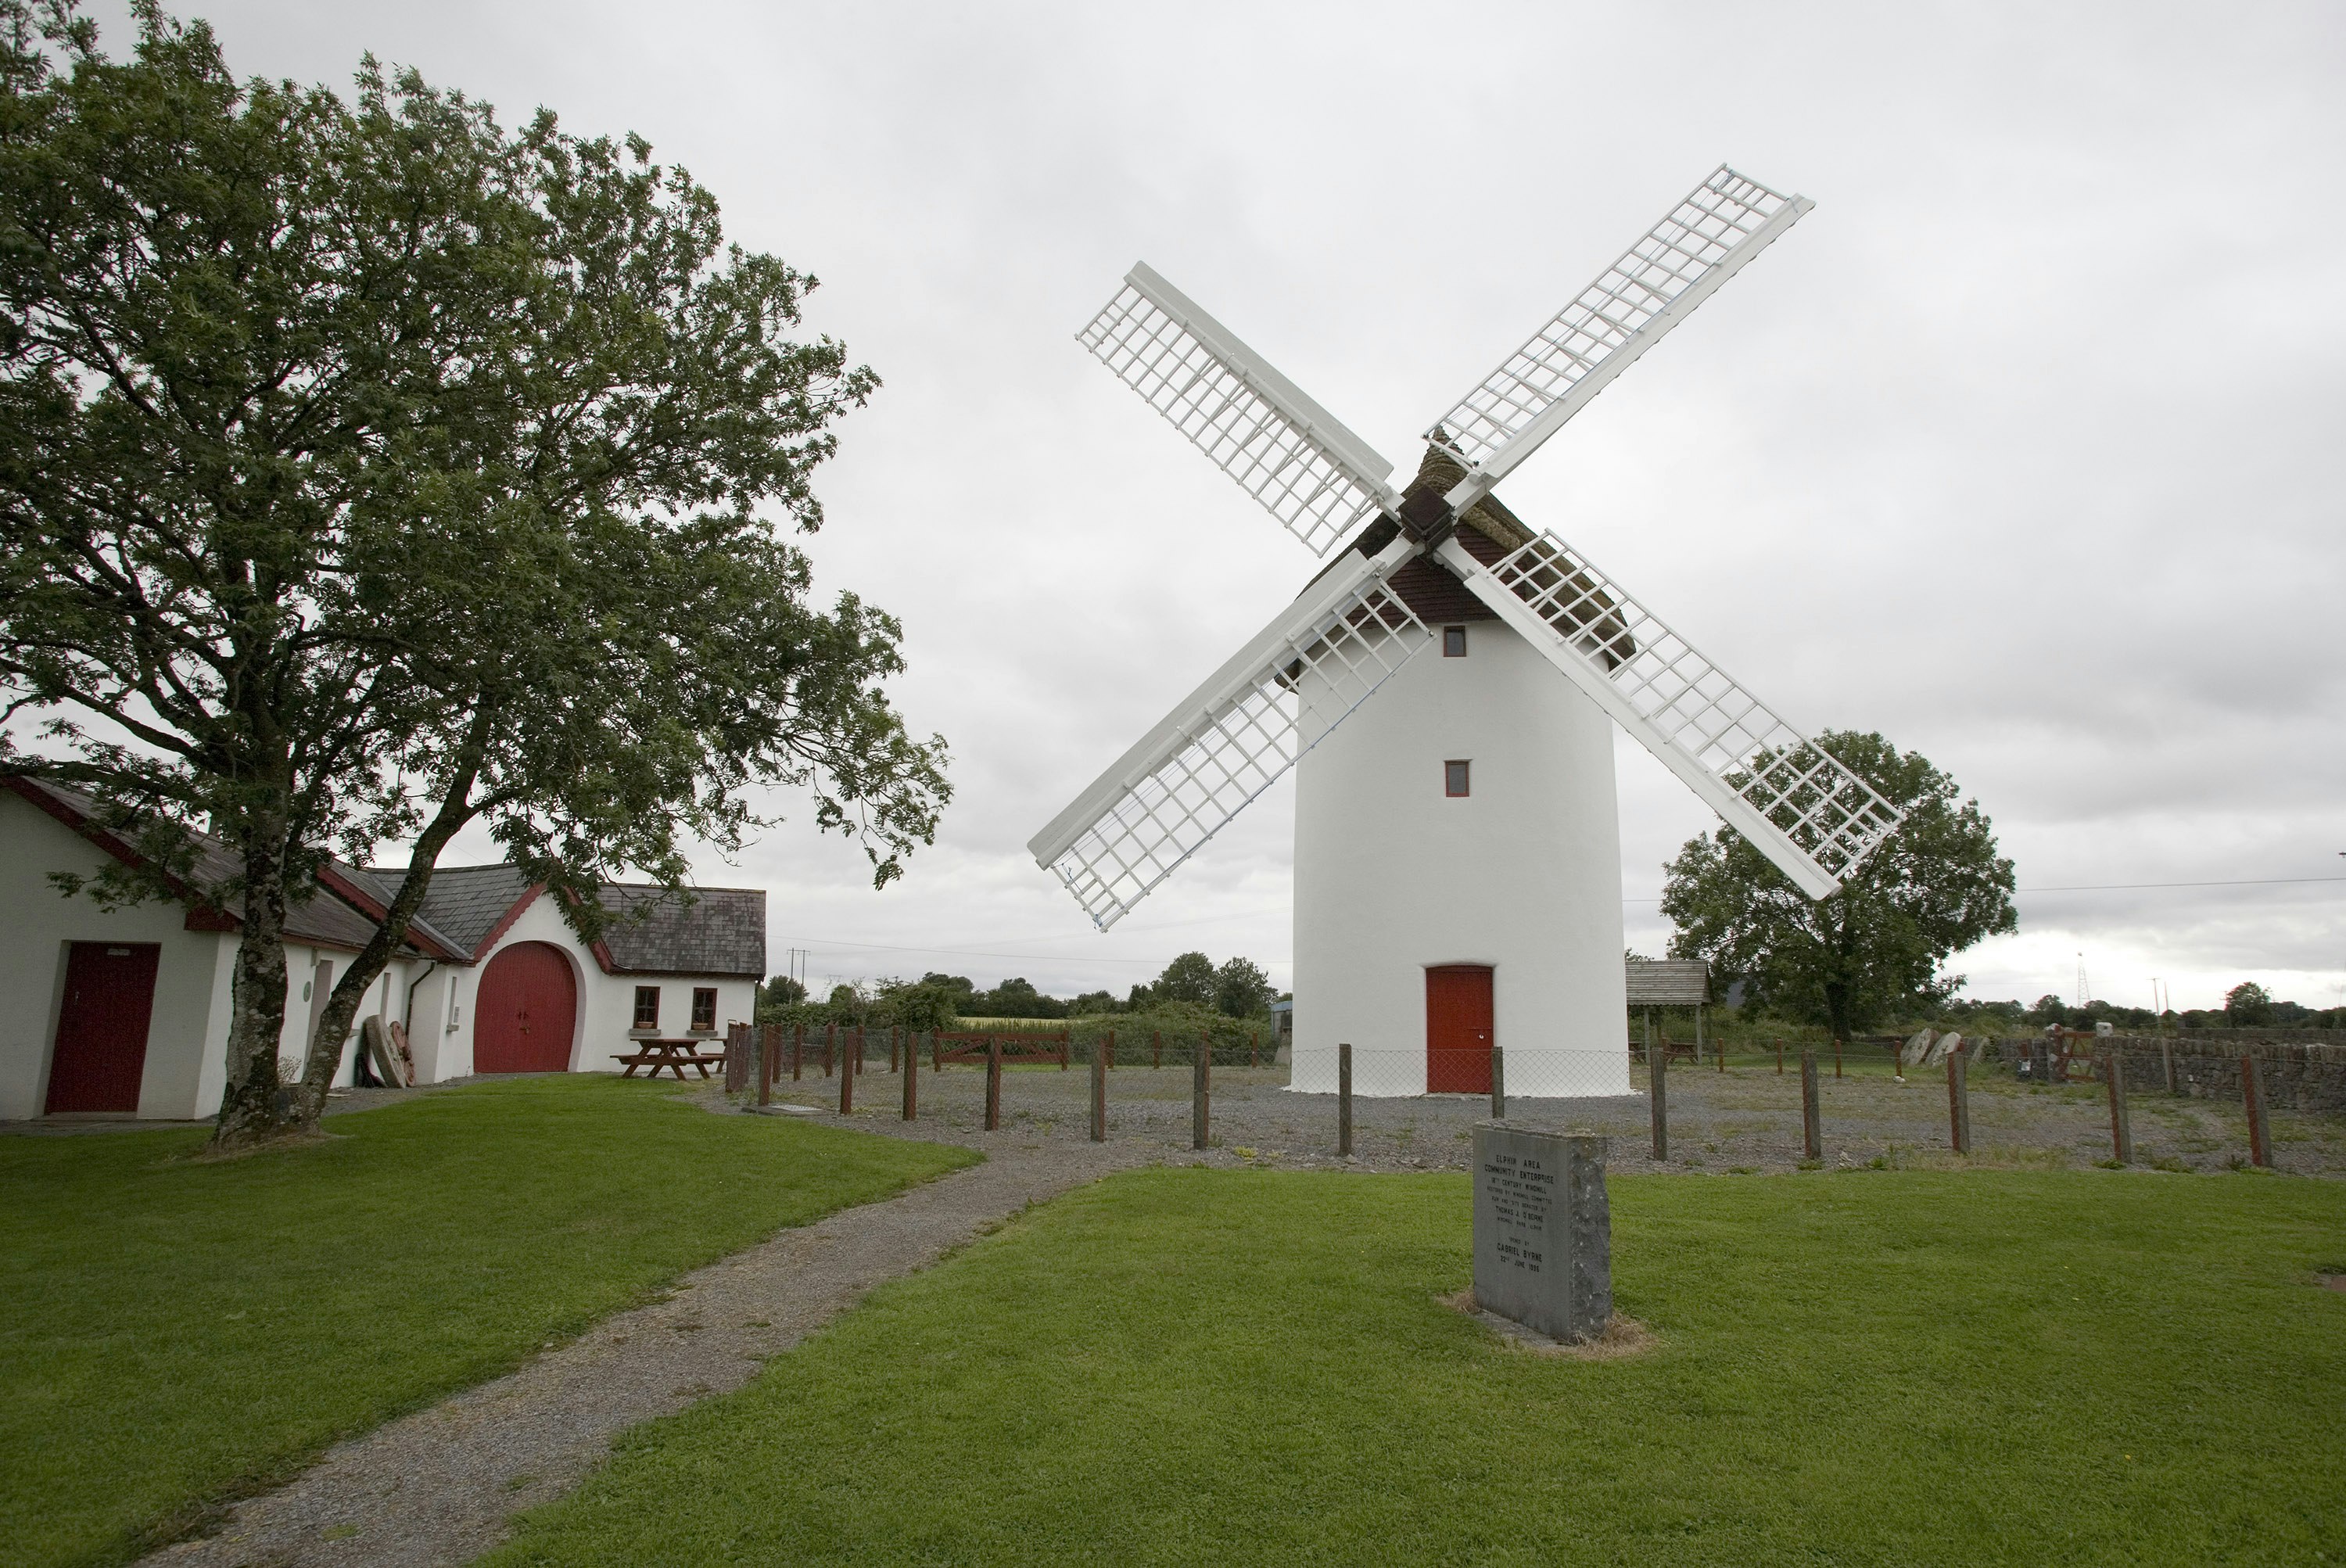 The Elphin Windmill was built in the 1730s